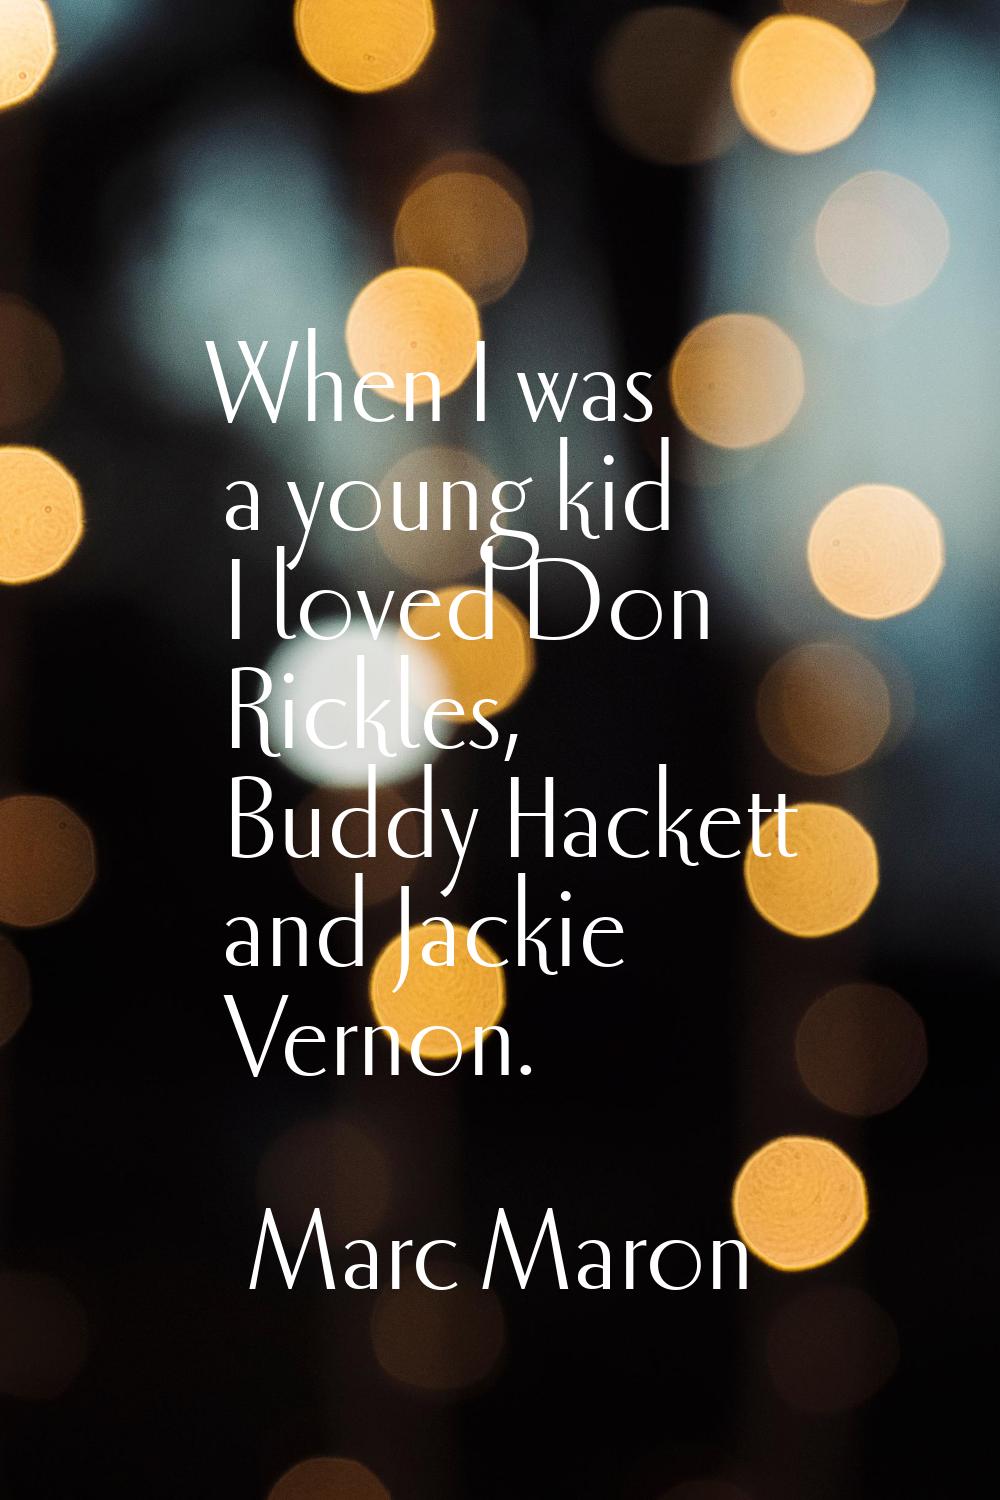 When I was a young kid I loved Don Rickles, Buddy Hackett and Jackie Vernon.